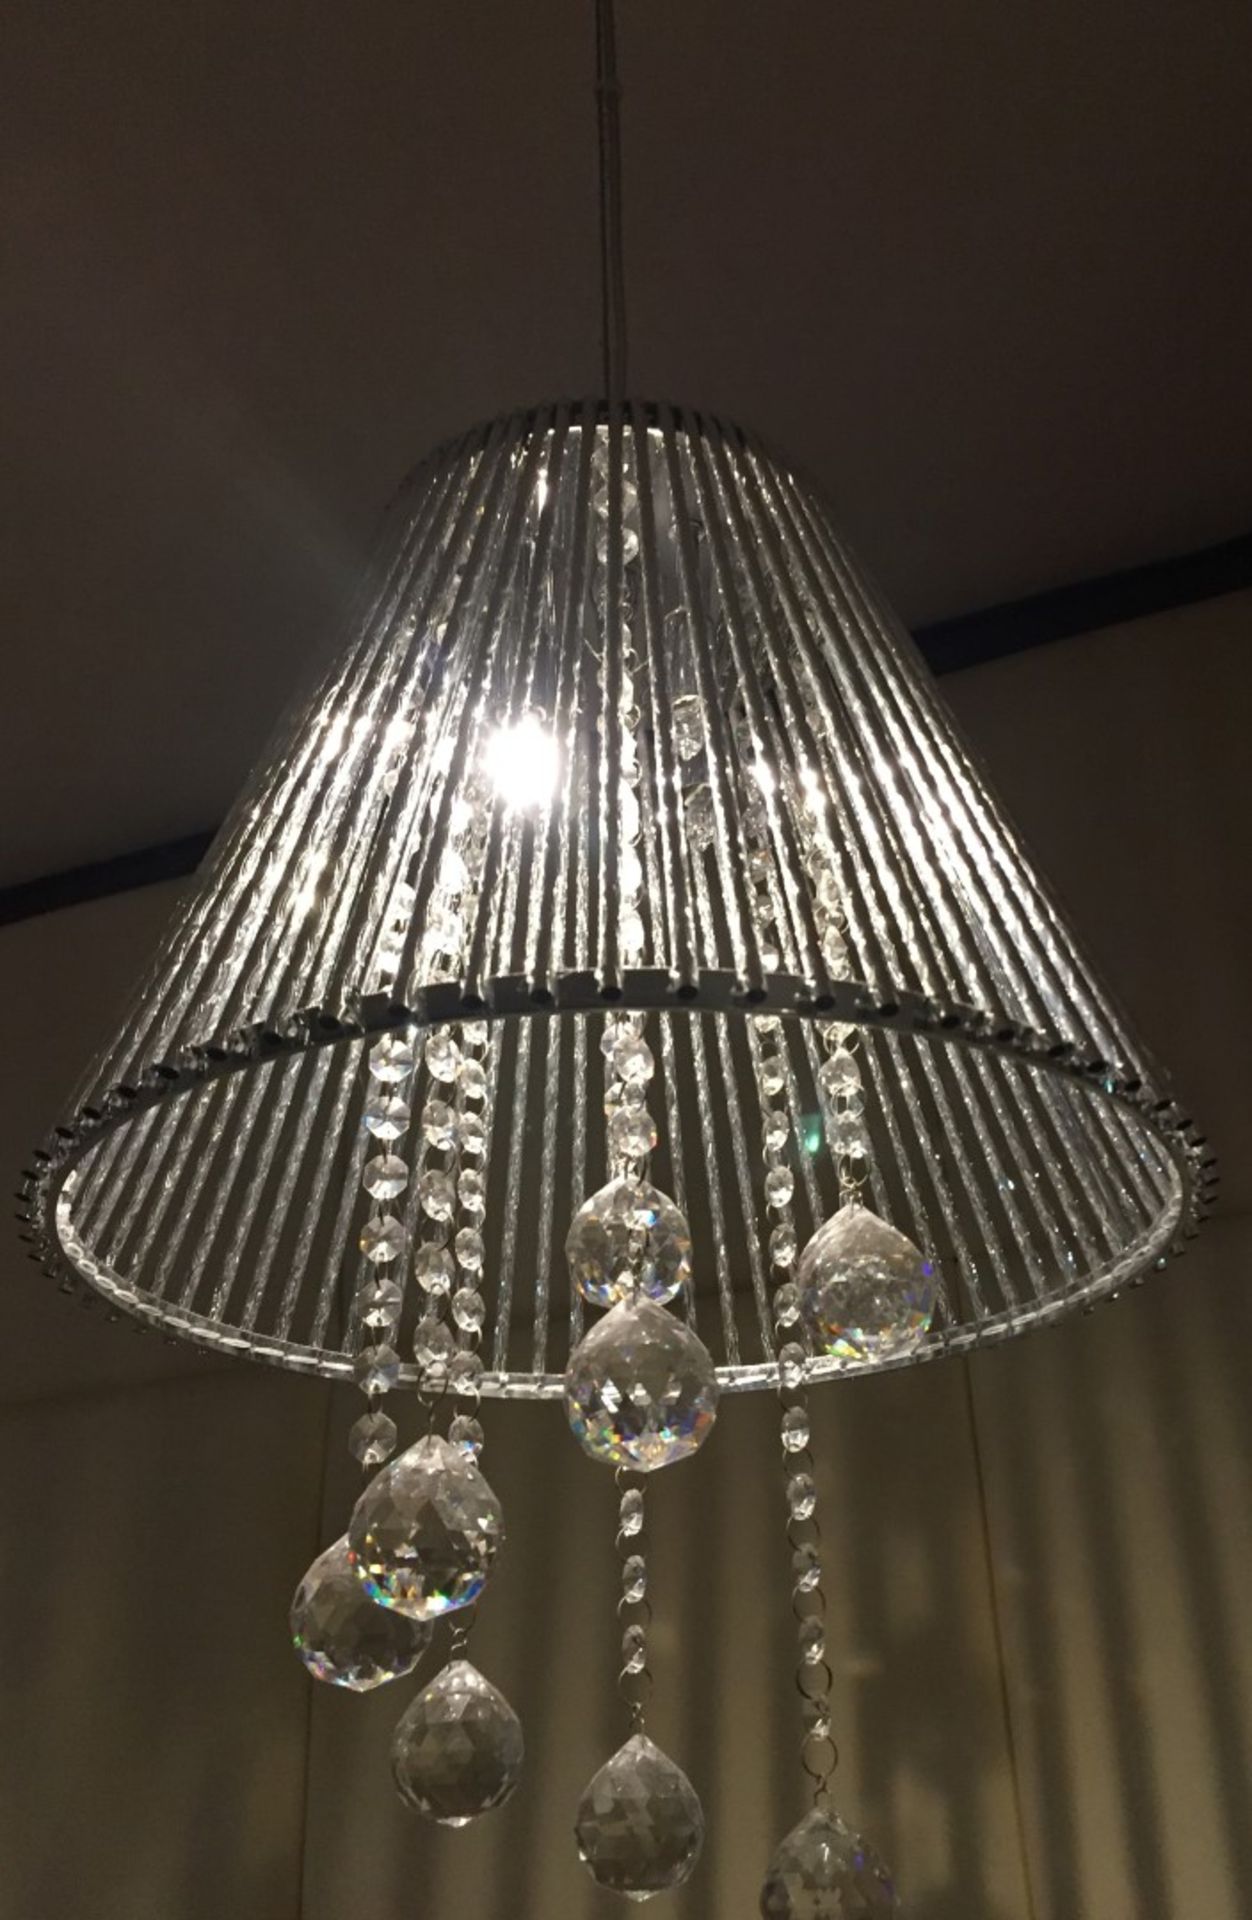 2 x Contemporary Pendant Ceiling Lights With Faux Crystal Droplets - CL188 - Ref GF1 - Location: - Image 2 of 4